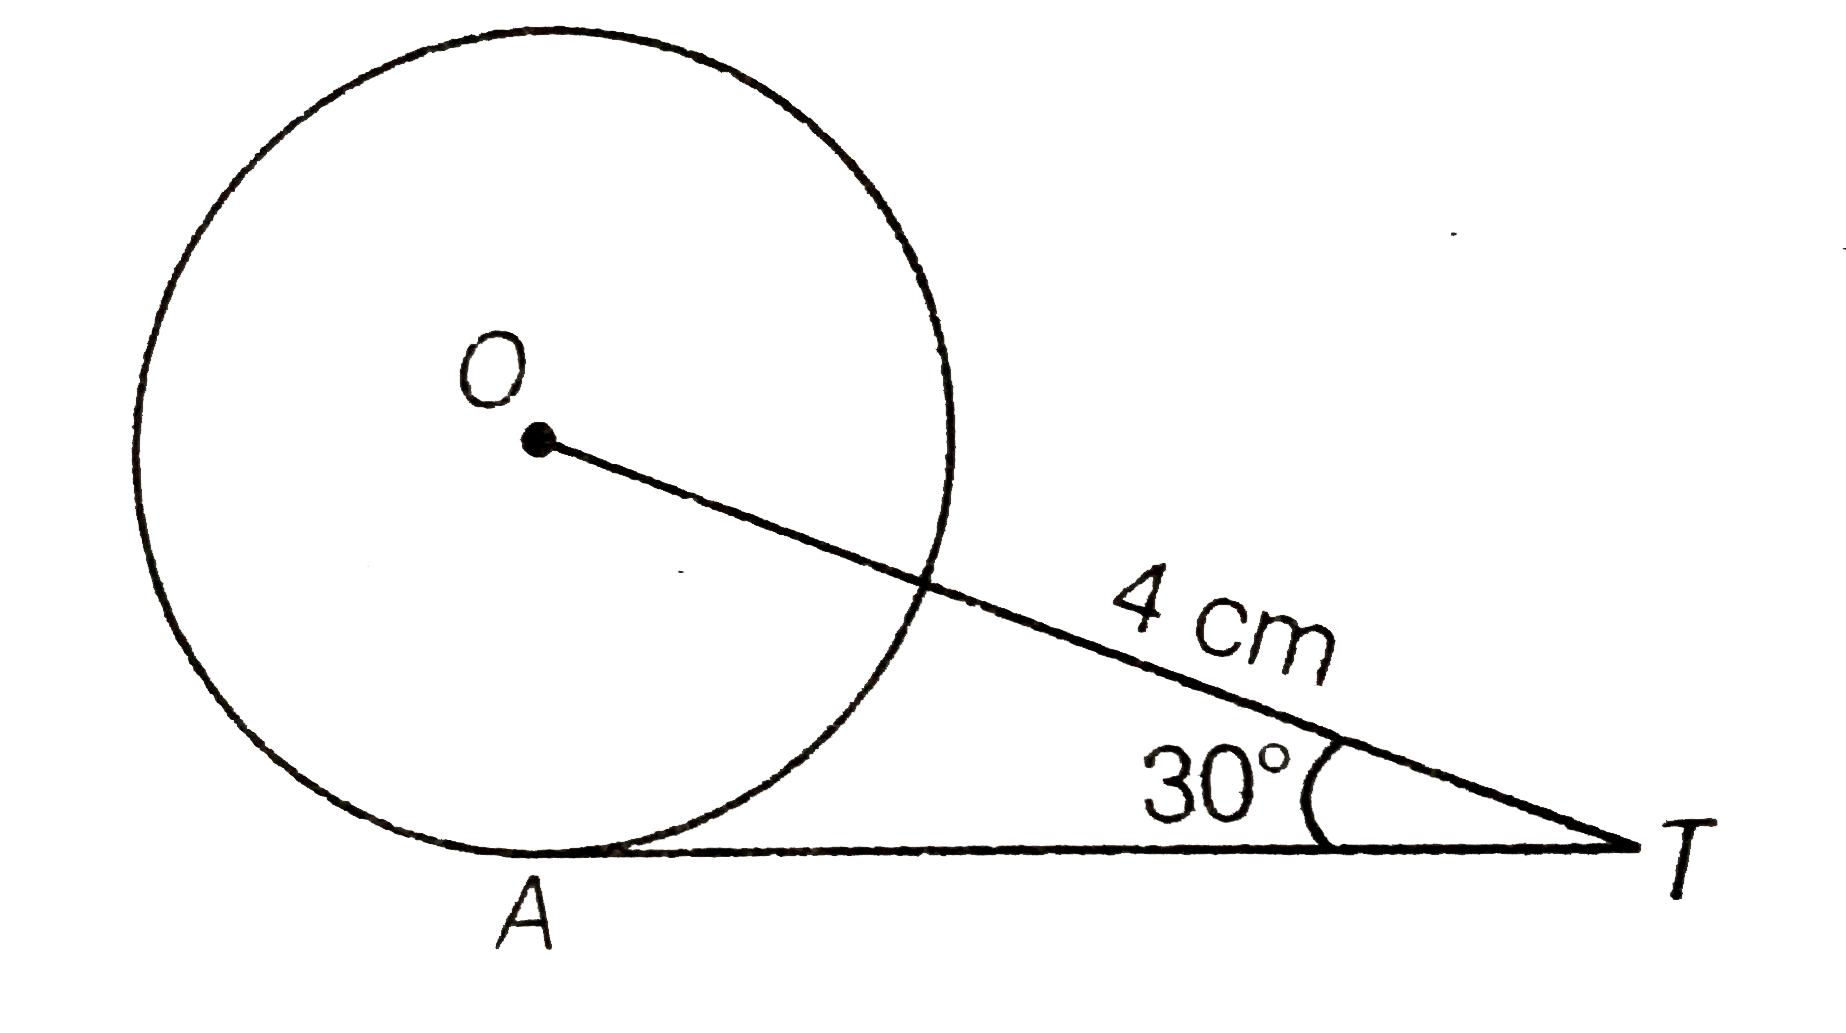 In figure, AT is a tangent to the circle with centre 0 such that OT = 4 cm and angleOTA=30^(@). Then, AT is equal to